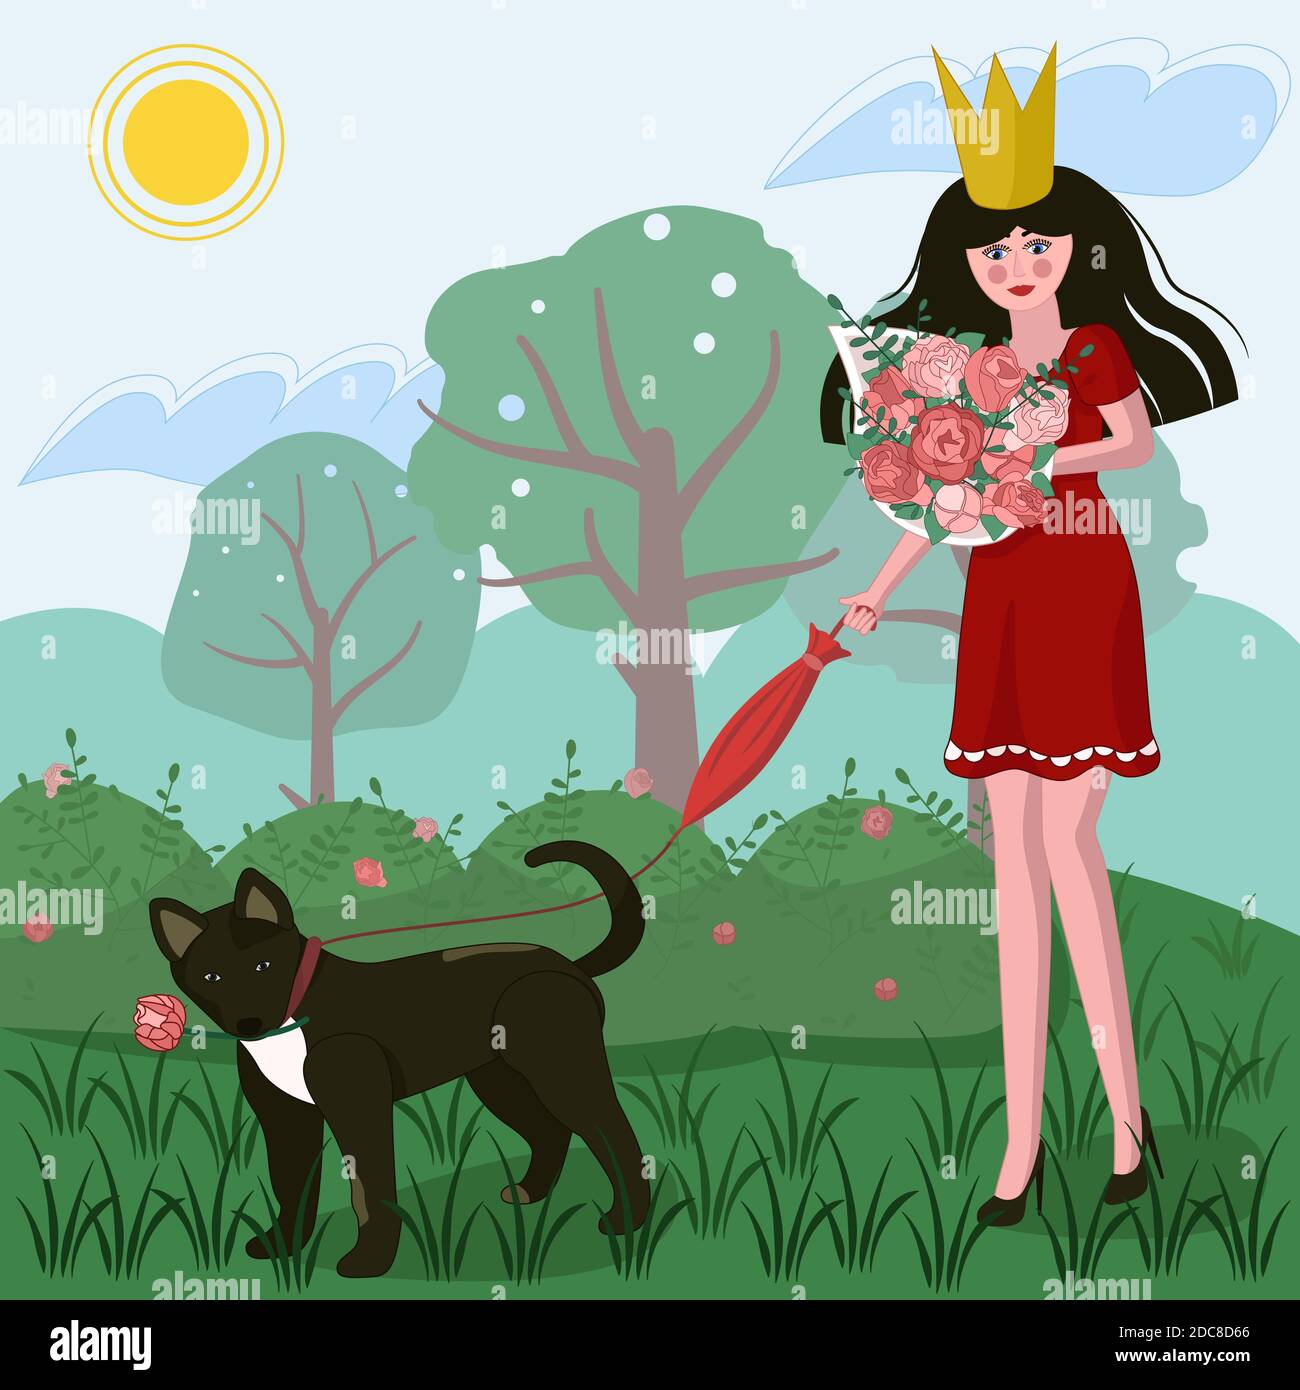 A girl in a red dress walks with her dog. She is holding a bouquet of flowers. This is a vector illustration. Stock Vector